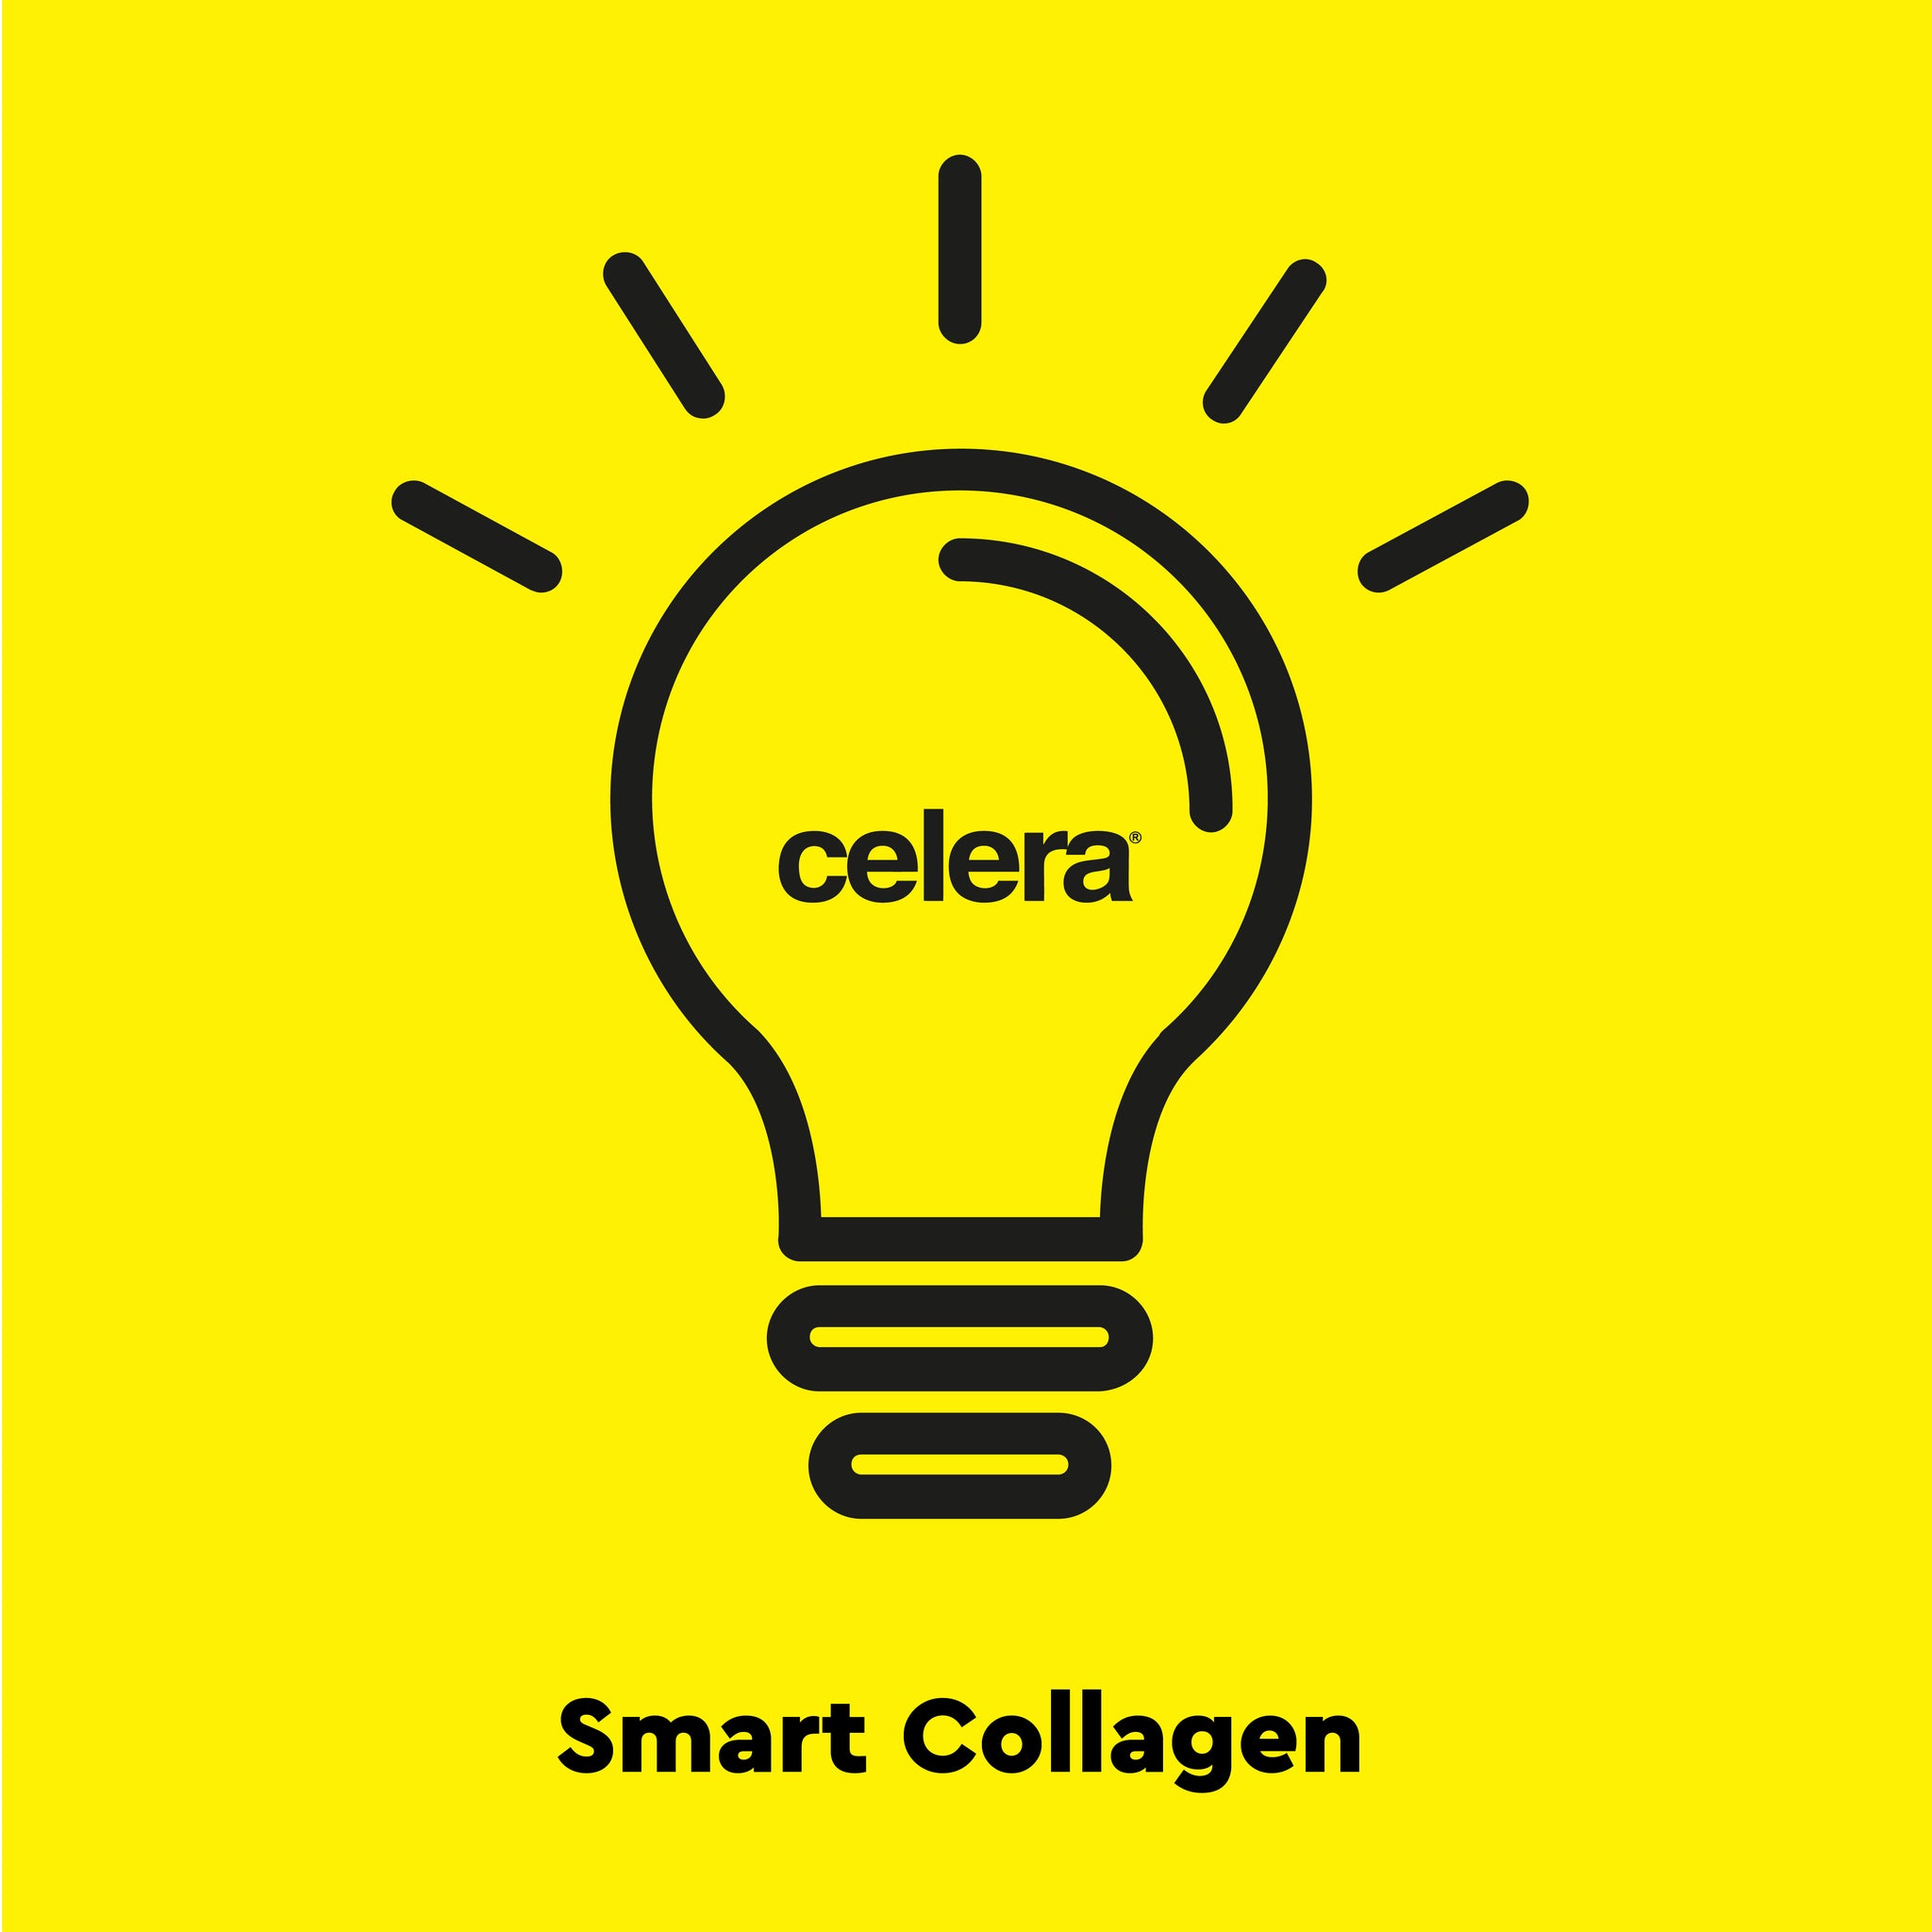 Smart Collagen 101 - When To Expect Results From Taking Collagen